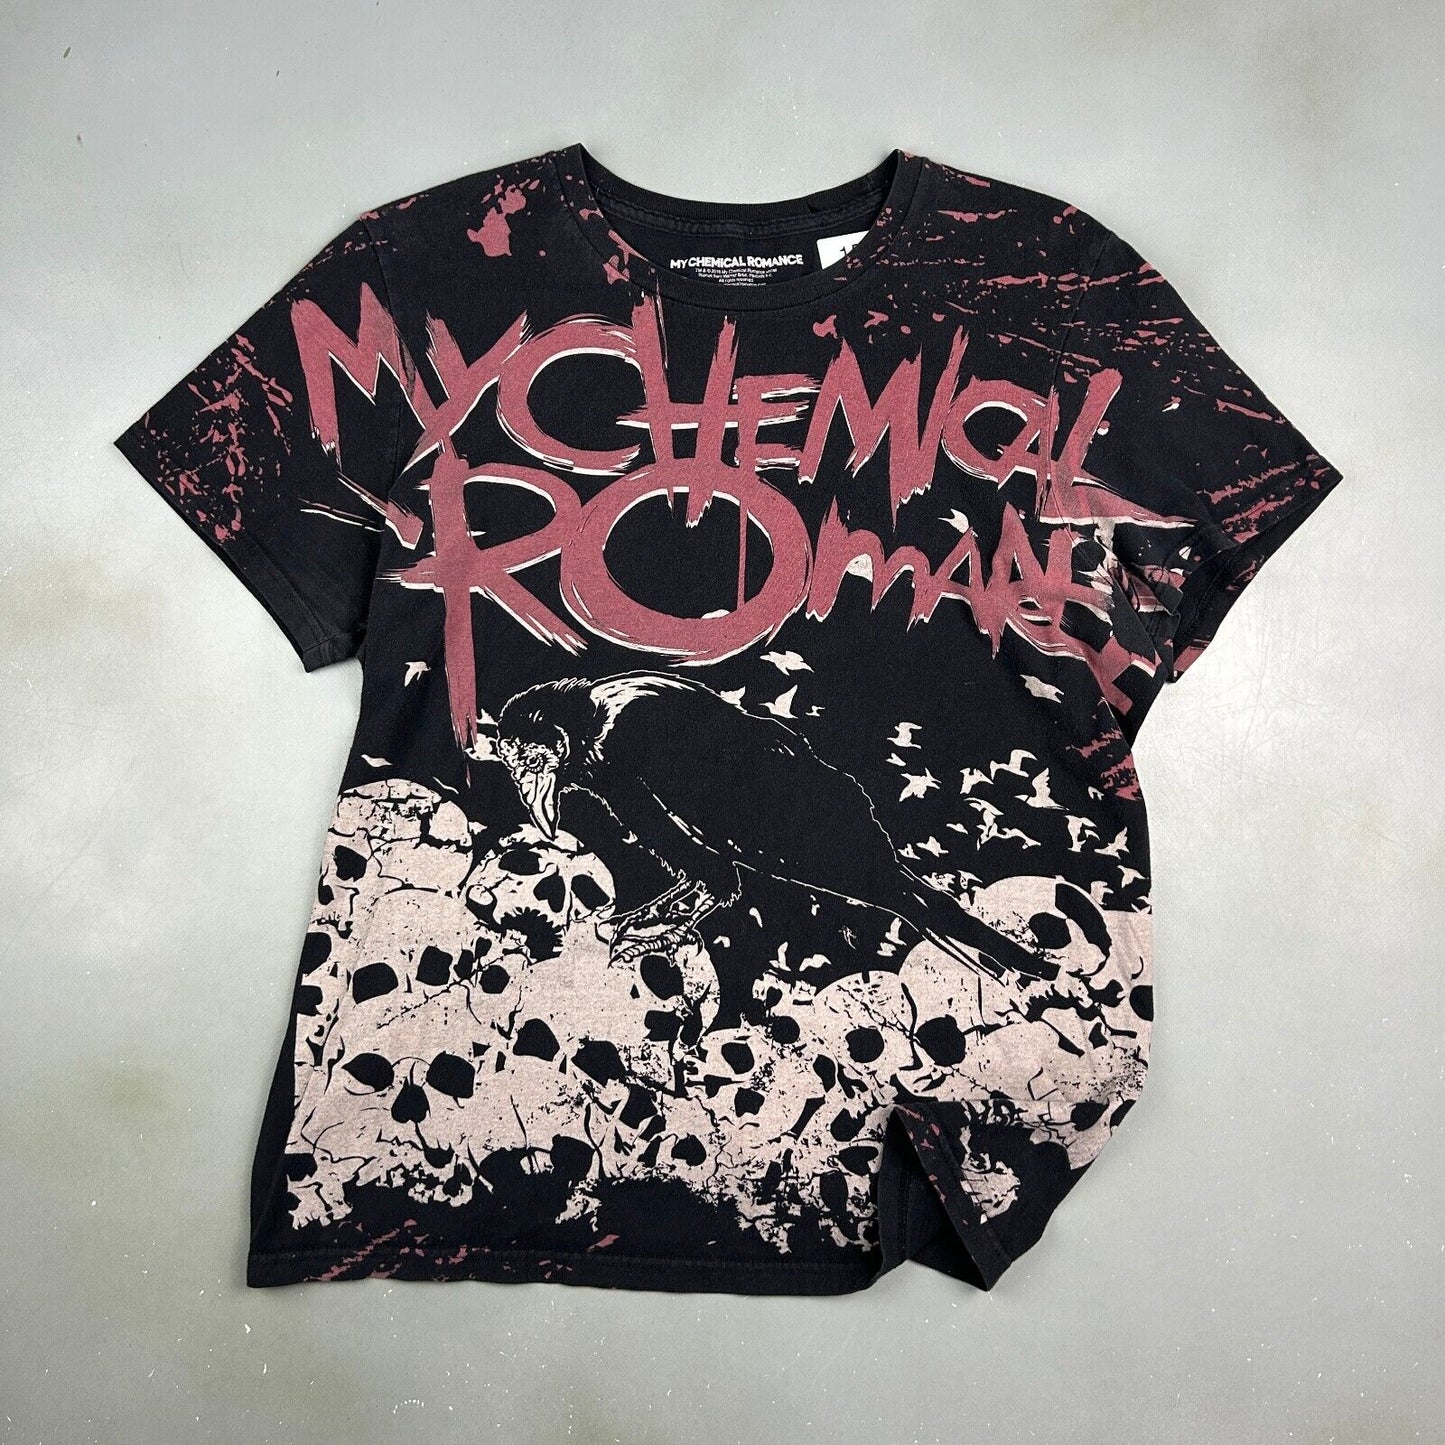 VINTAGE | My Chemical Romance All Over Print Black Band T-Shirt sz M Adult